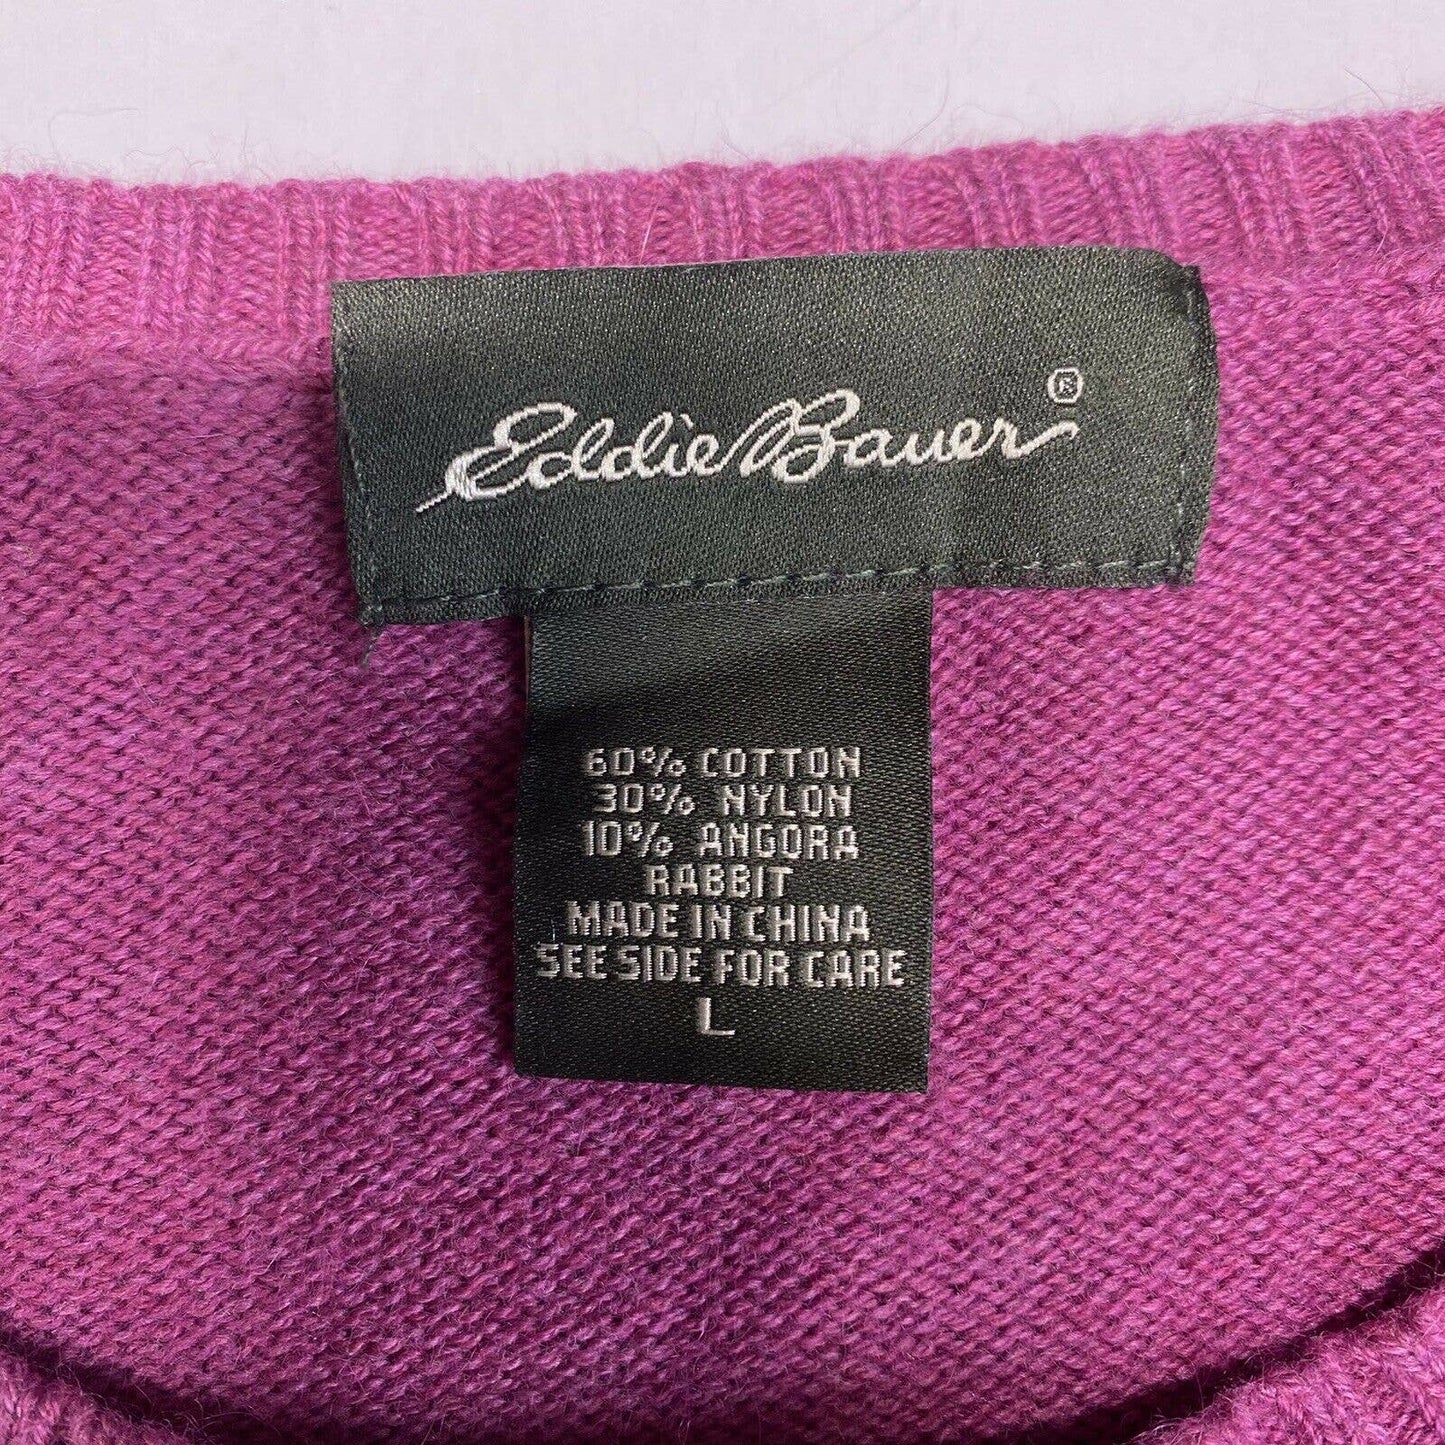 Eddie Bauer Knit Sweater Sz Large Pink Pullover Angora Blend Long Sleeve Top